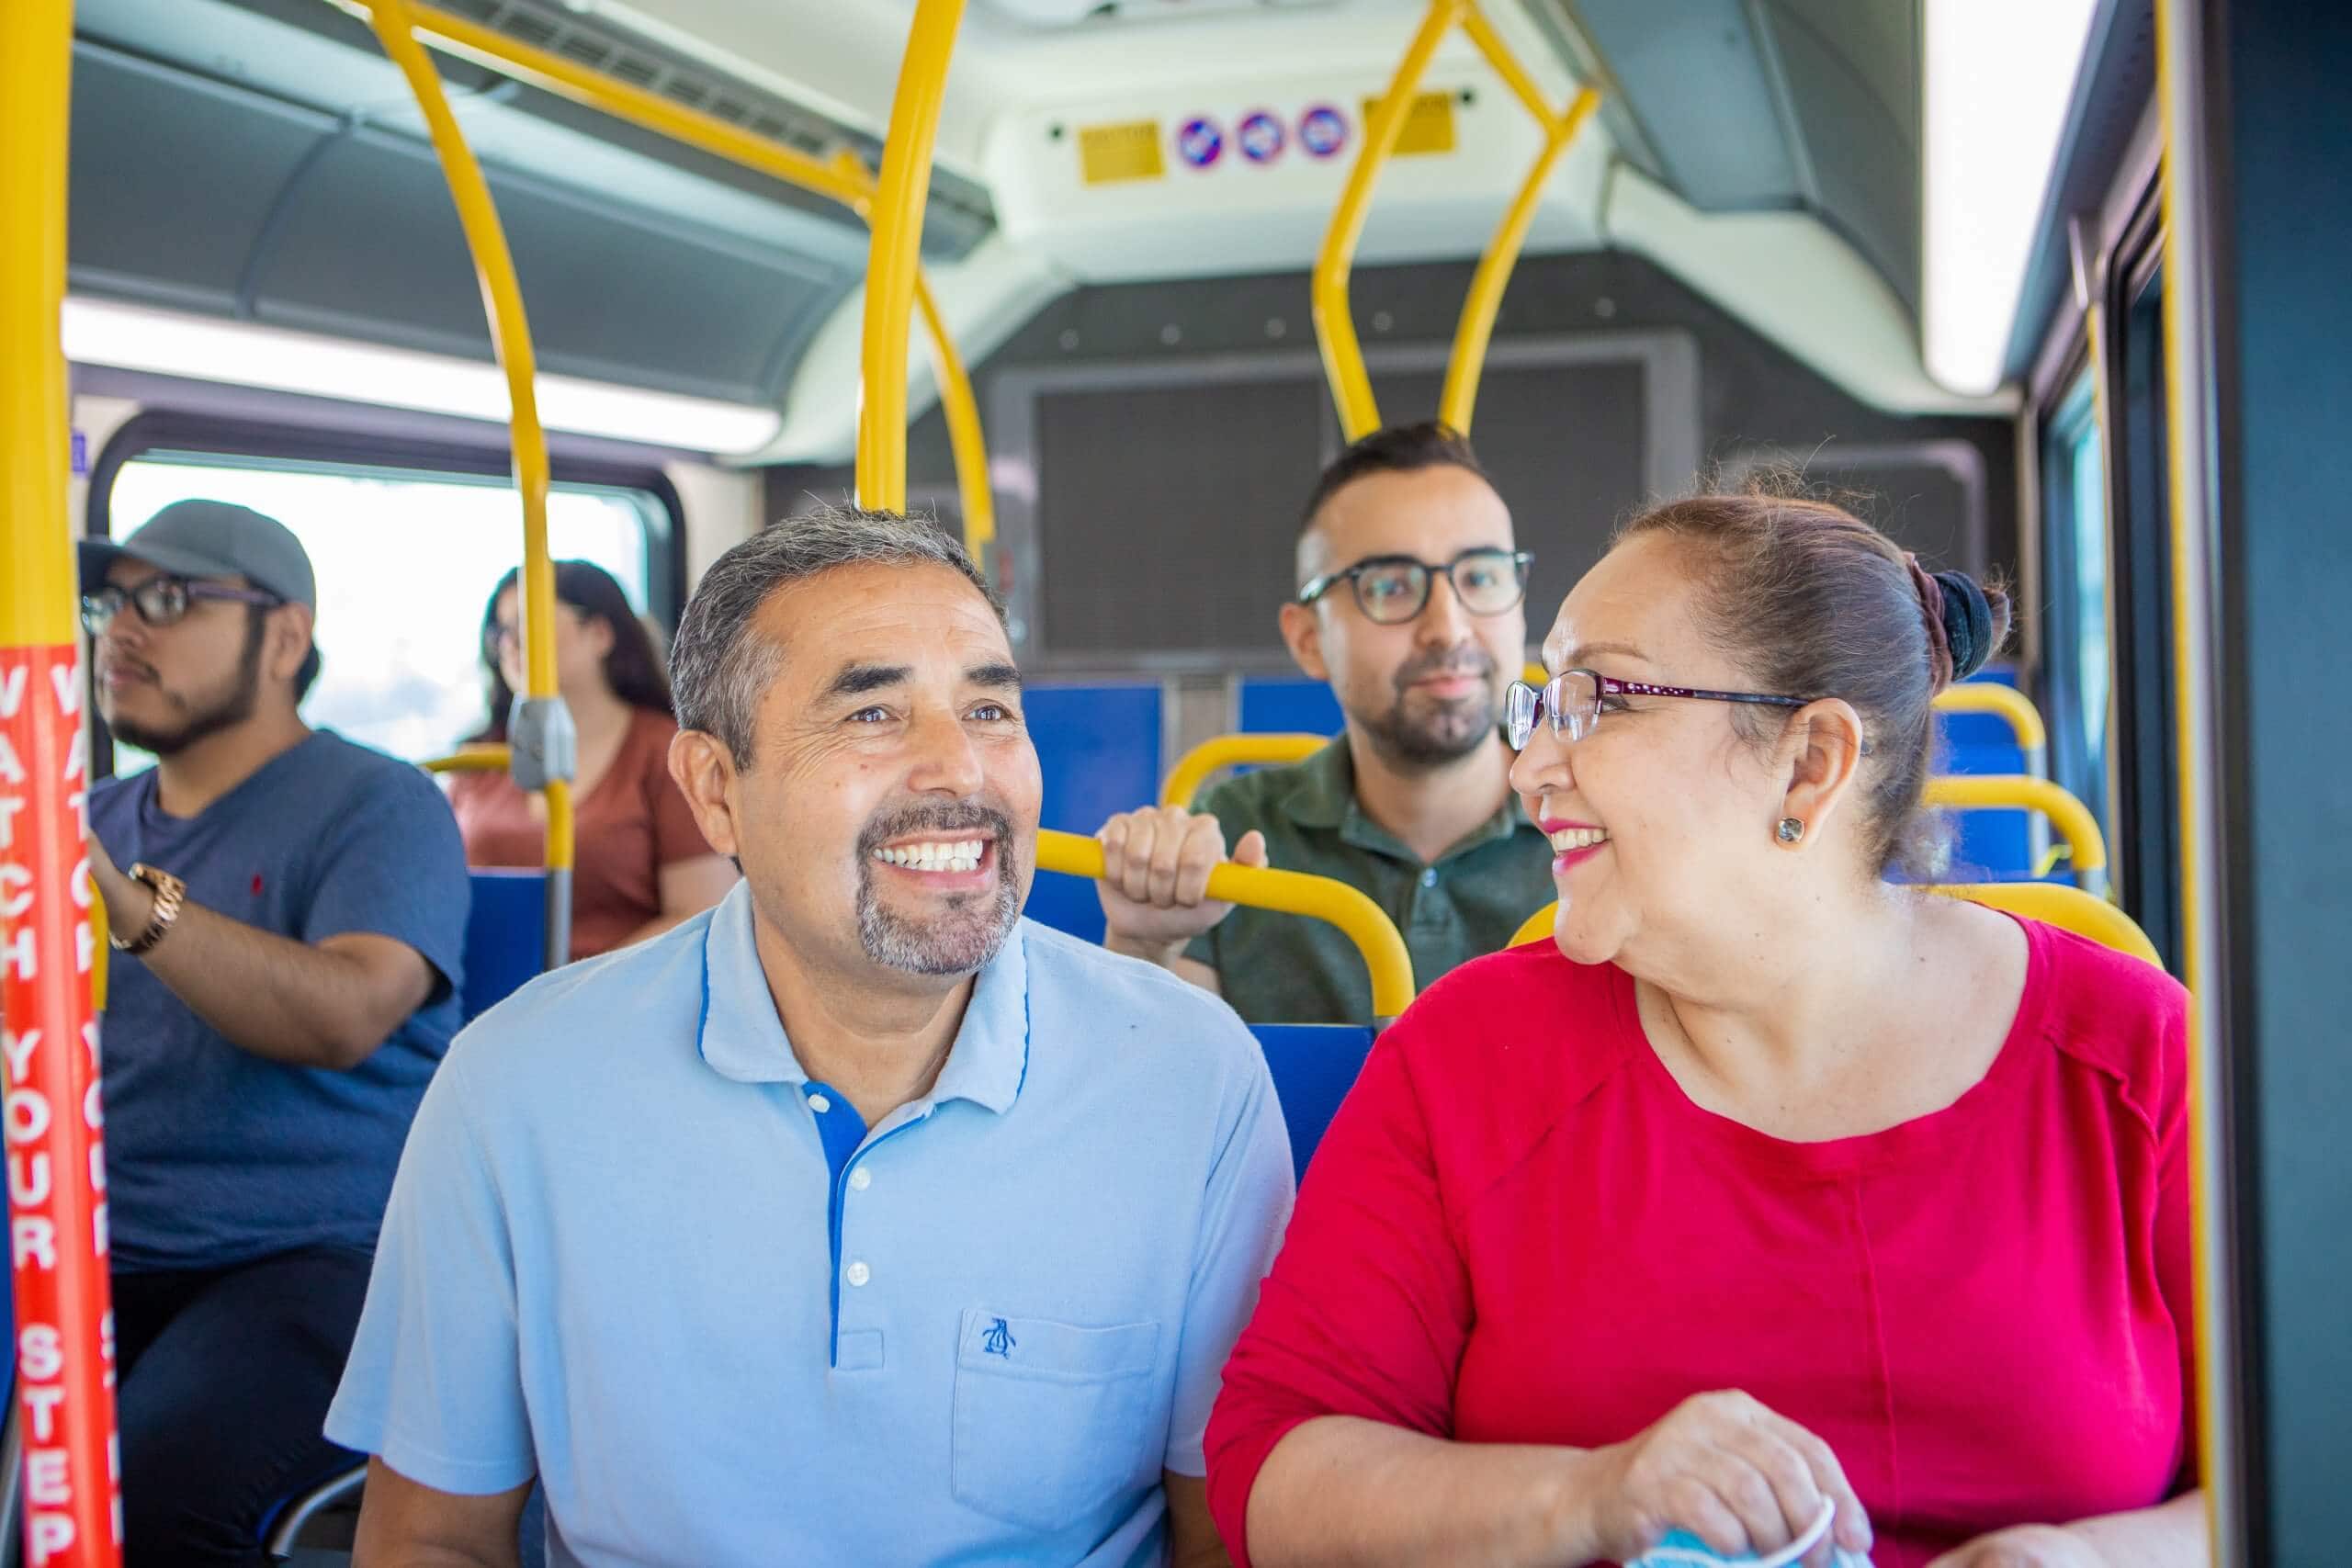 Omnitrans Customers Remain Highly Satisfied According to 2020 Transit Survey Results